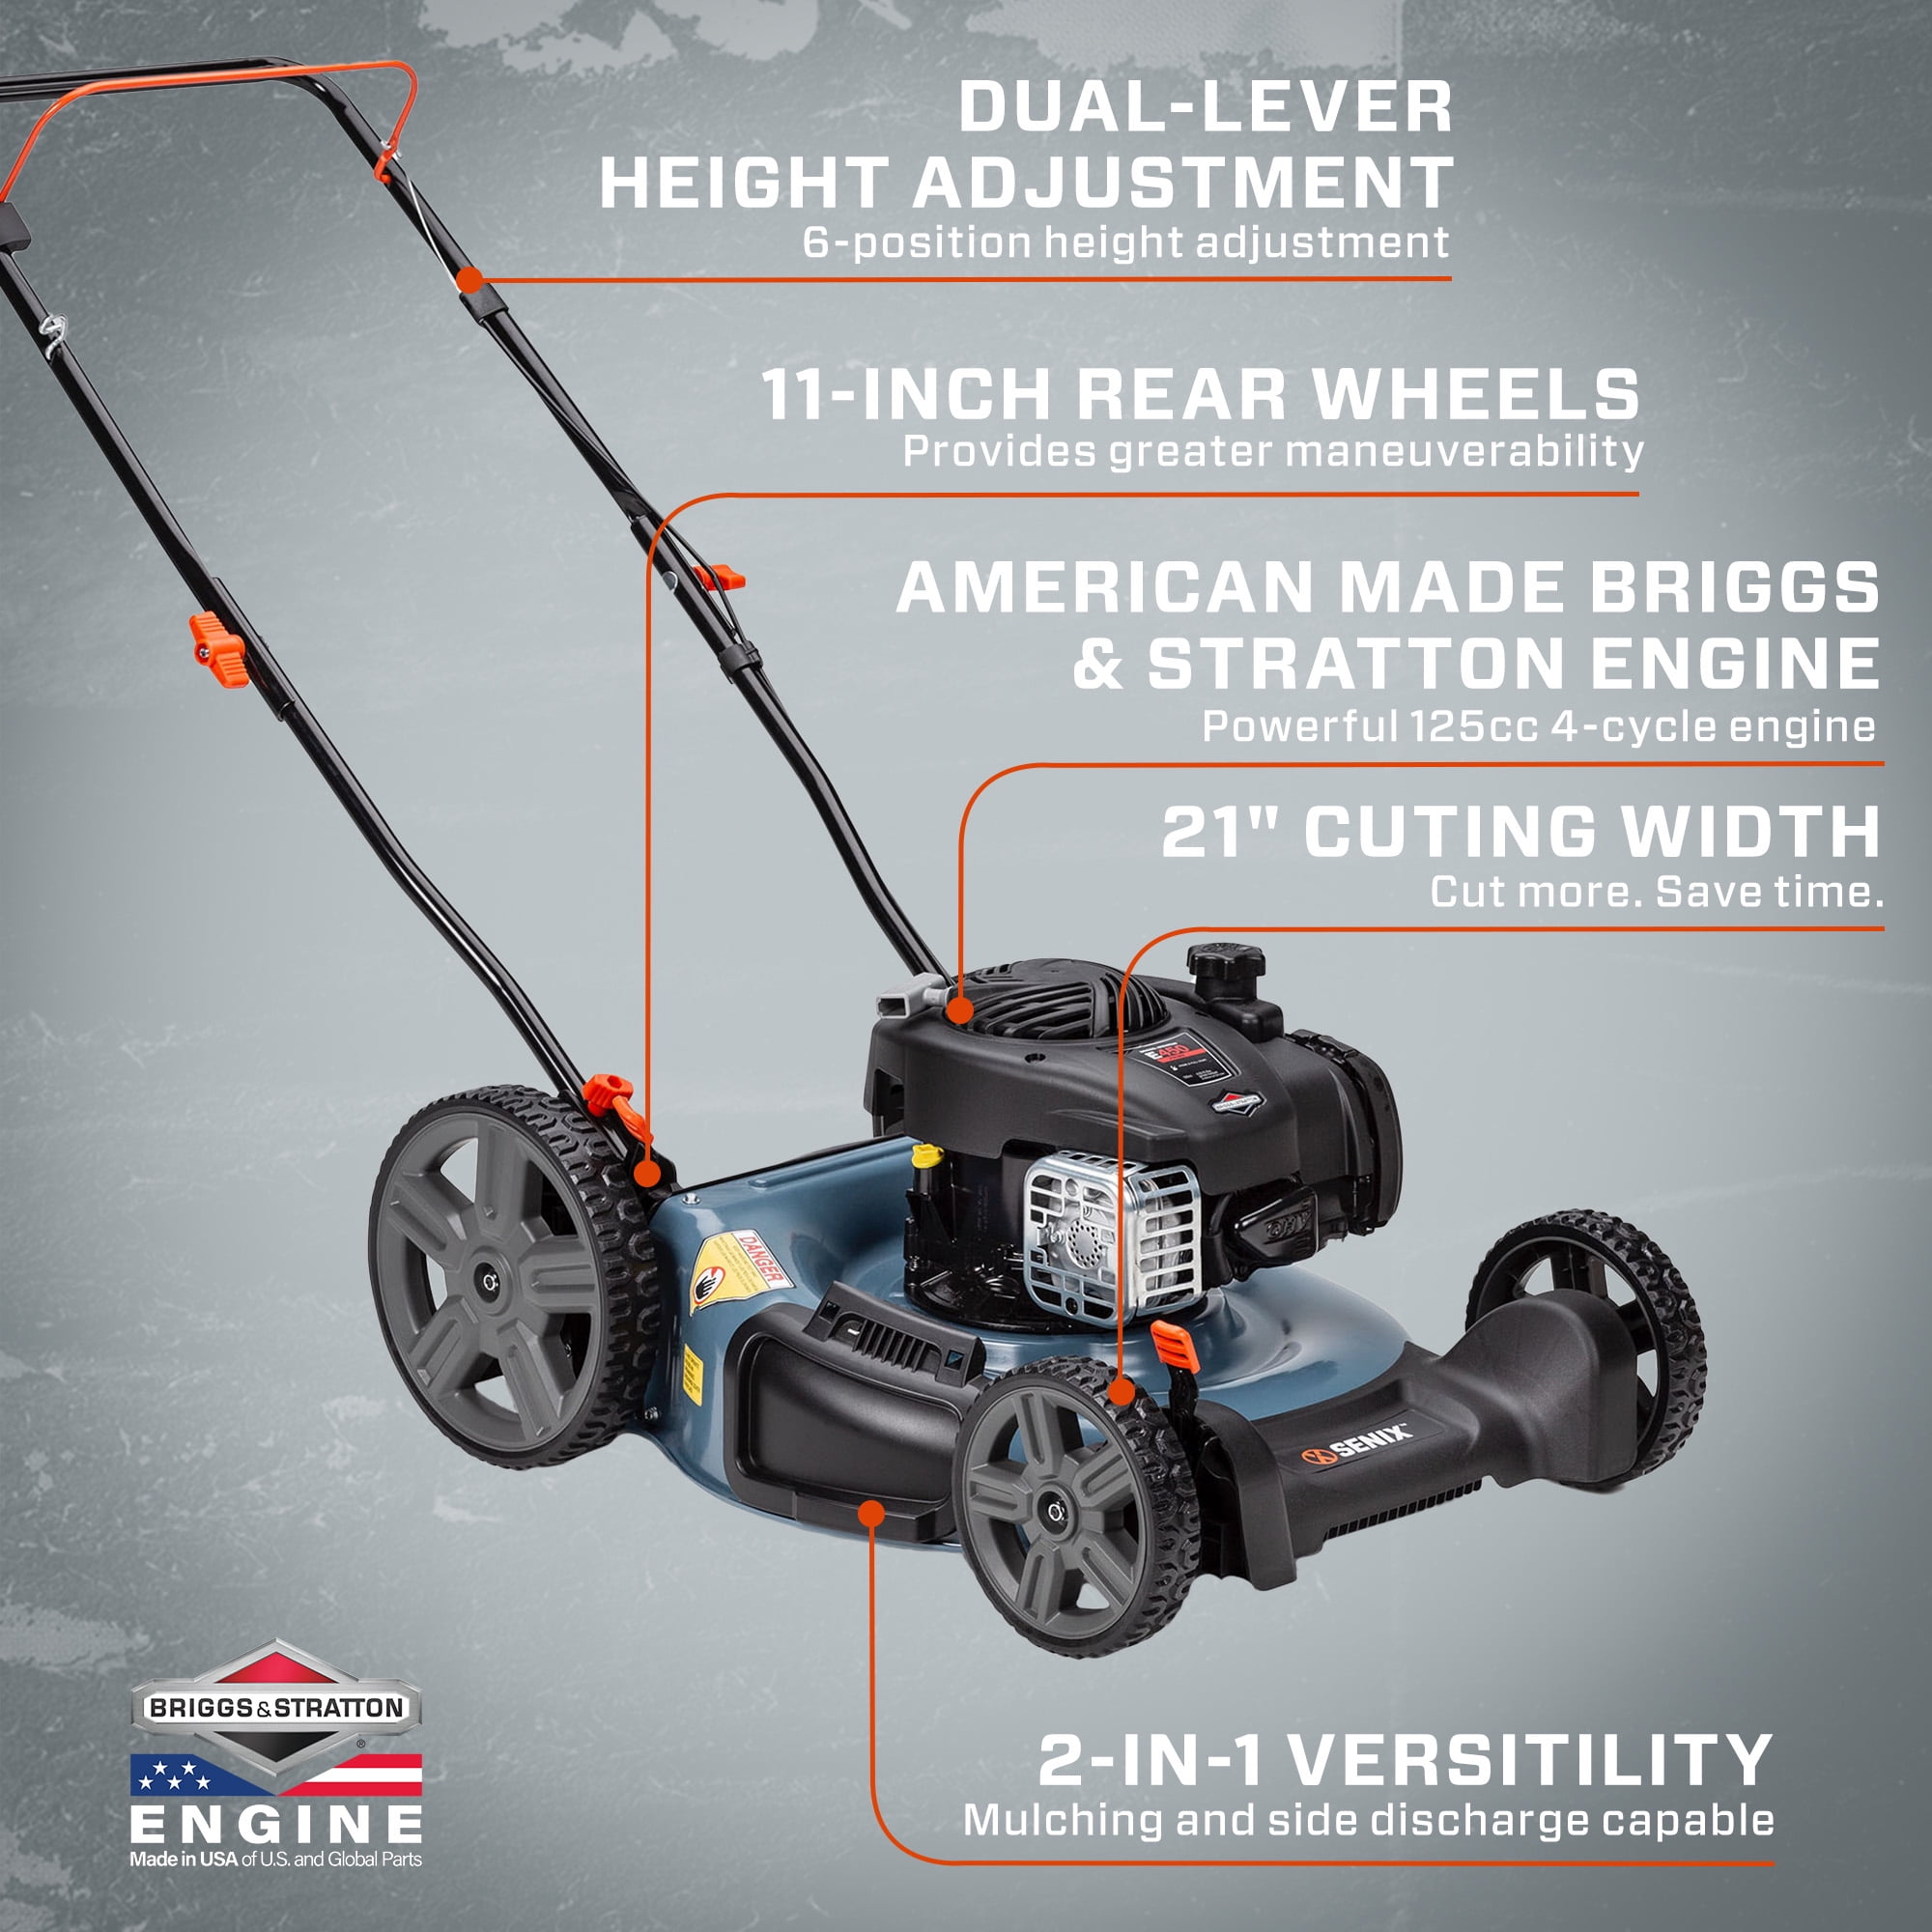 SENIX 21In Gas Lawn Mower, 125cc 4-Cycle Briggs & Stratton Engine, 2-In-1 Push Lawnmower, 6 Height Adjustment with 11In Rear Wheels, LSPG-M4